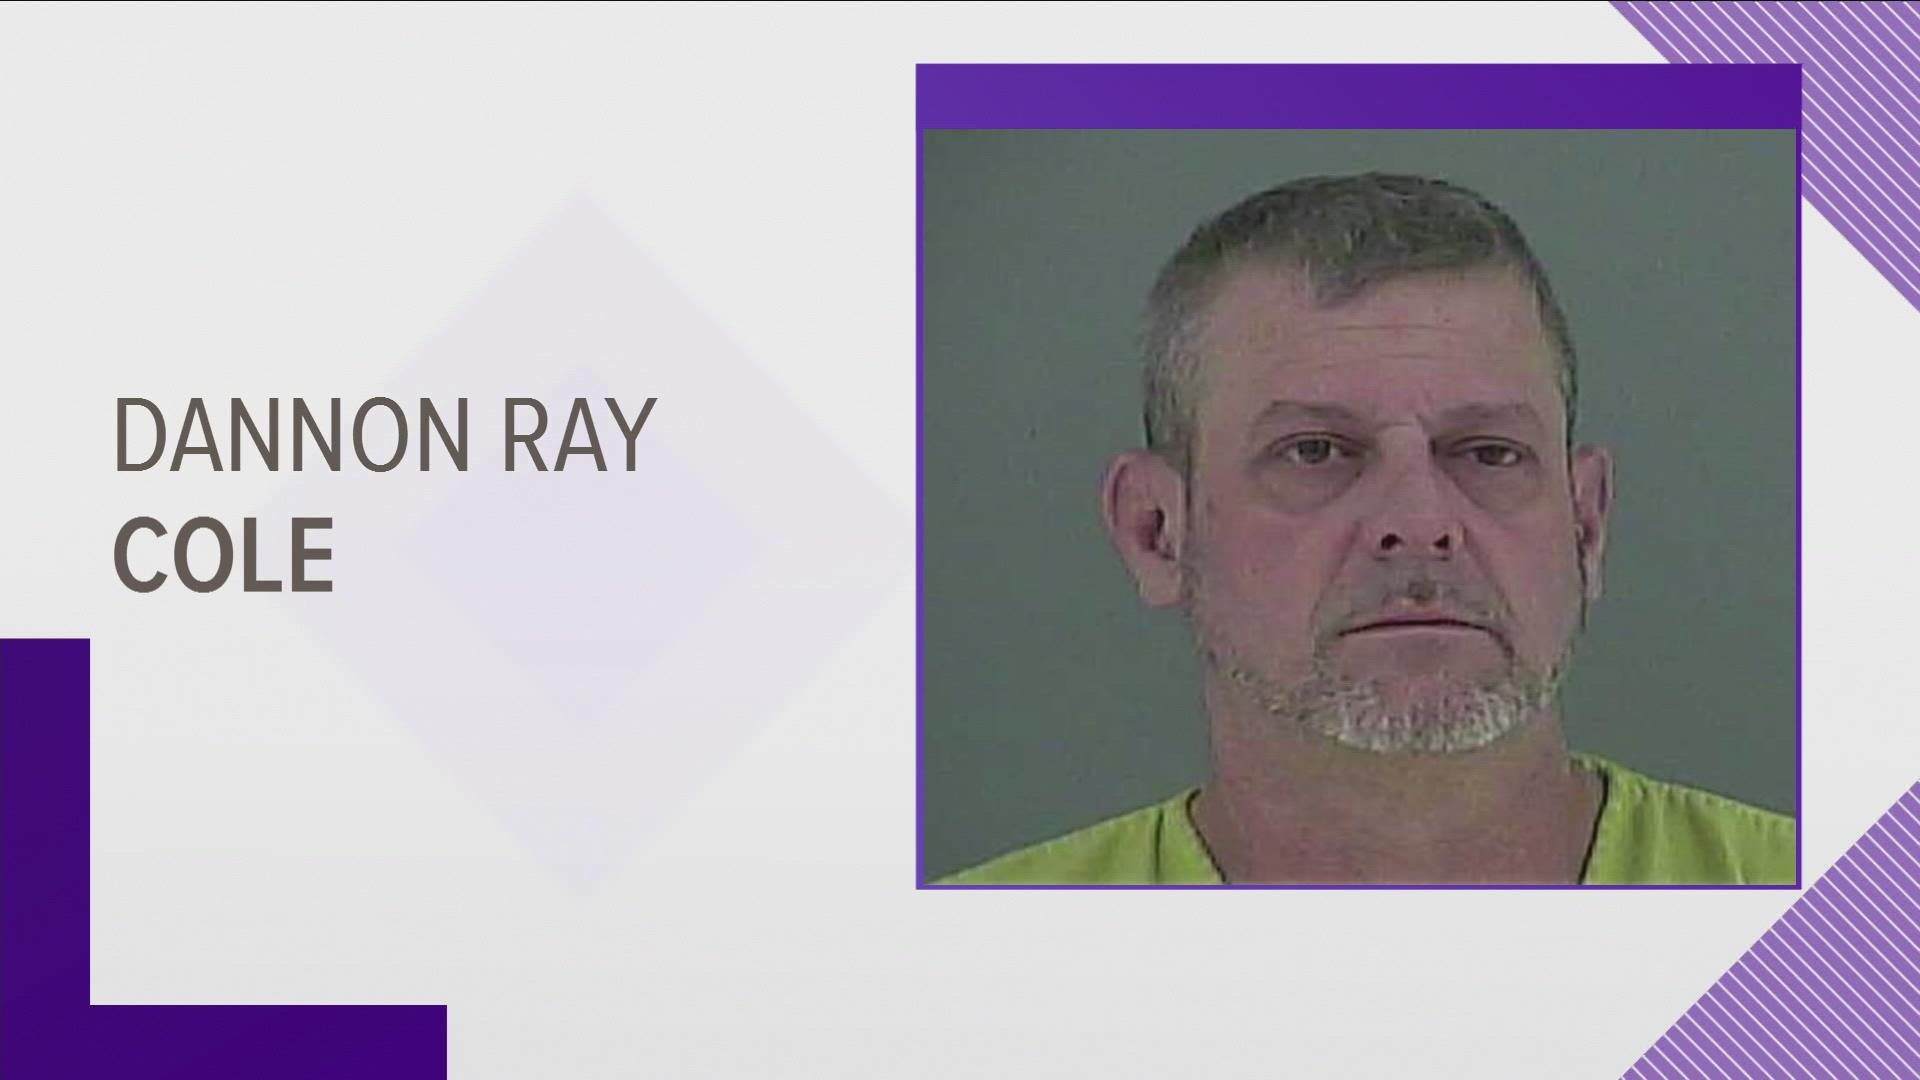 CPD is now asking the public's help in locating Damien Ray Cole, 50, of Clinton who they identify as a person of interest.